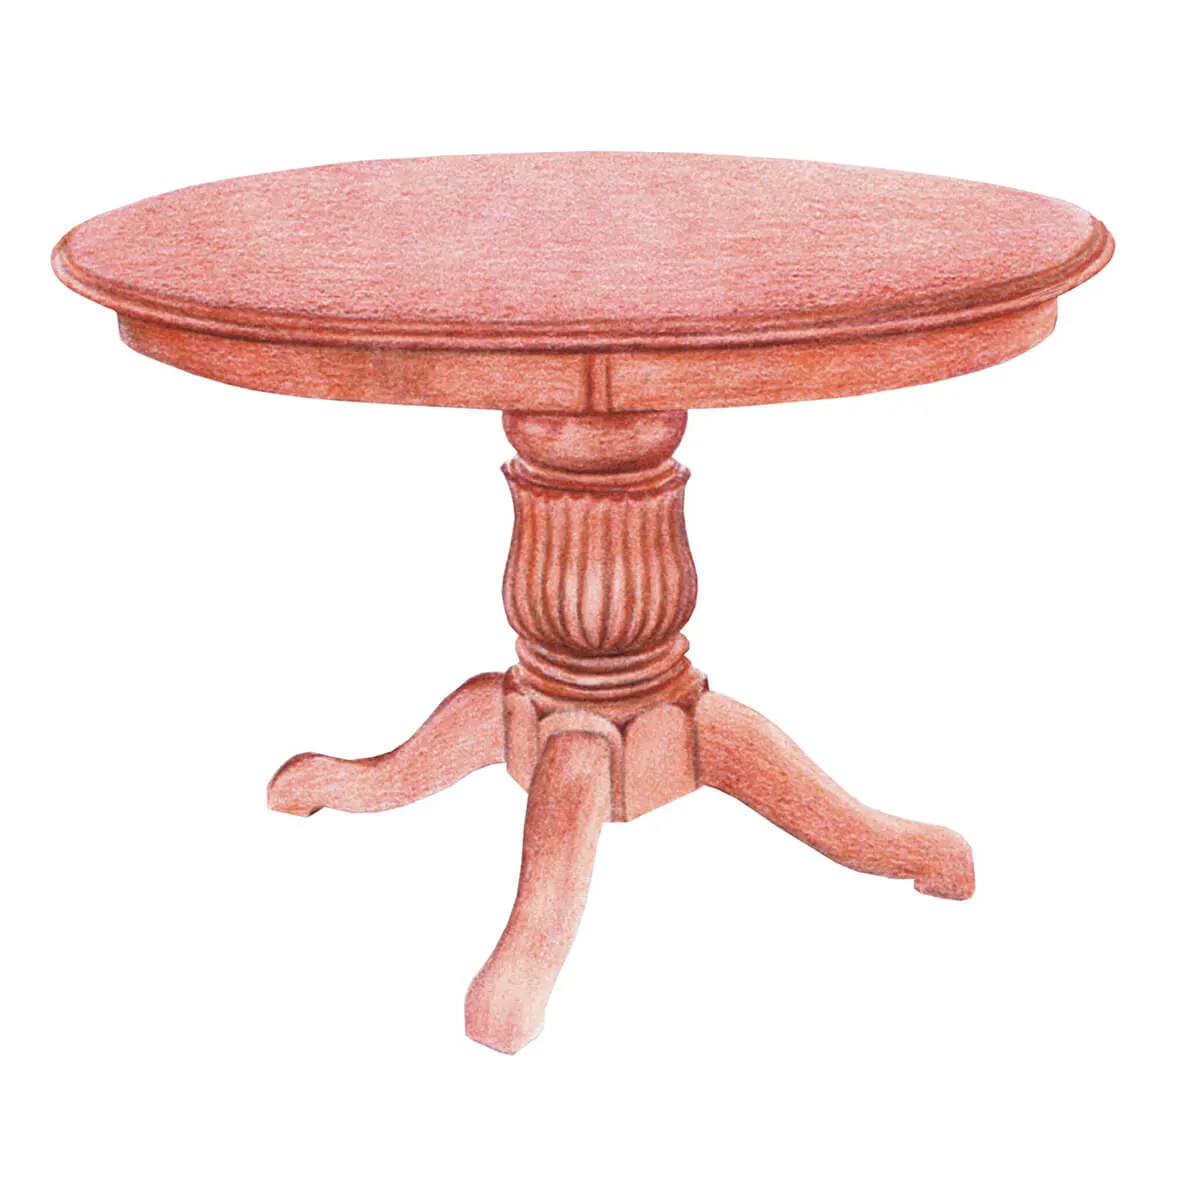 42 Inch Round Tulip Pedestal Dining Table